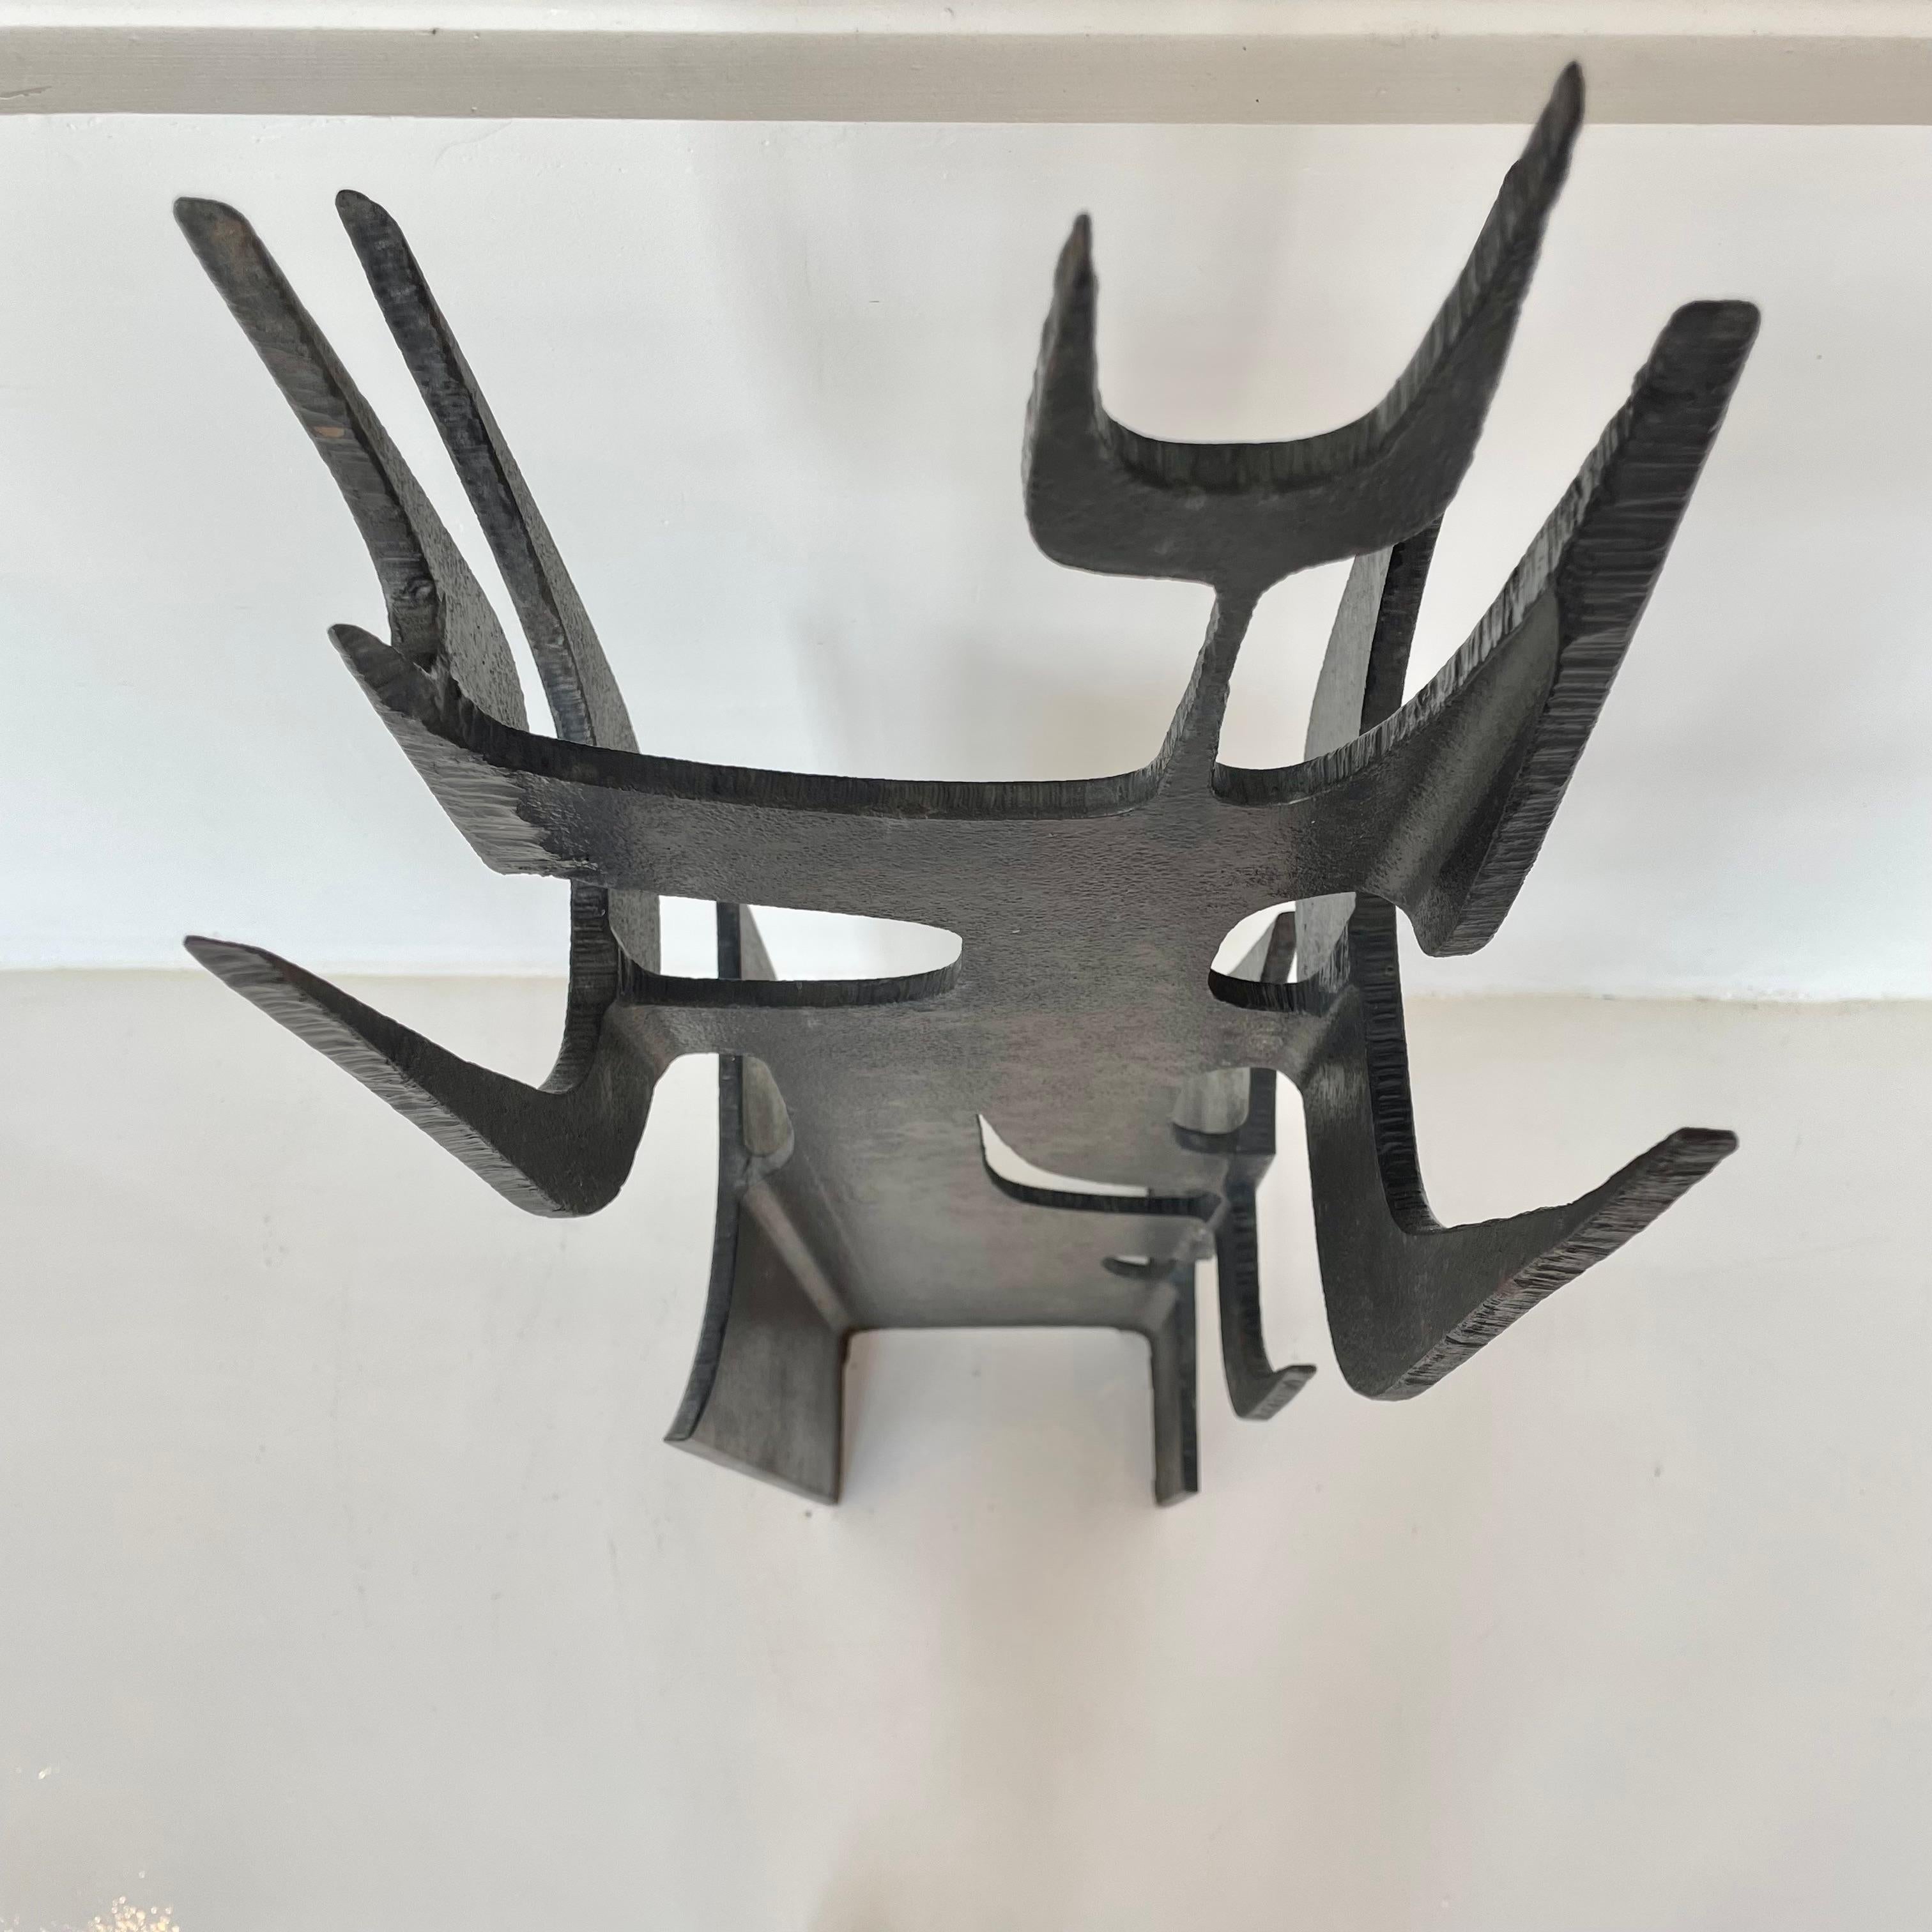 Hand-Crafted Steel Sculpture in the Style of Alexander Calder For Sale